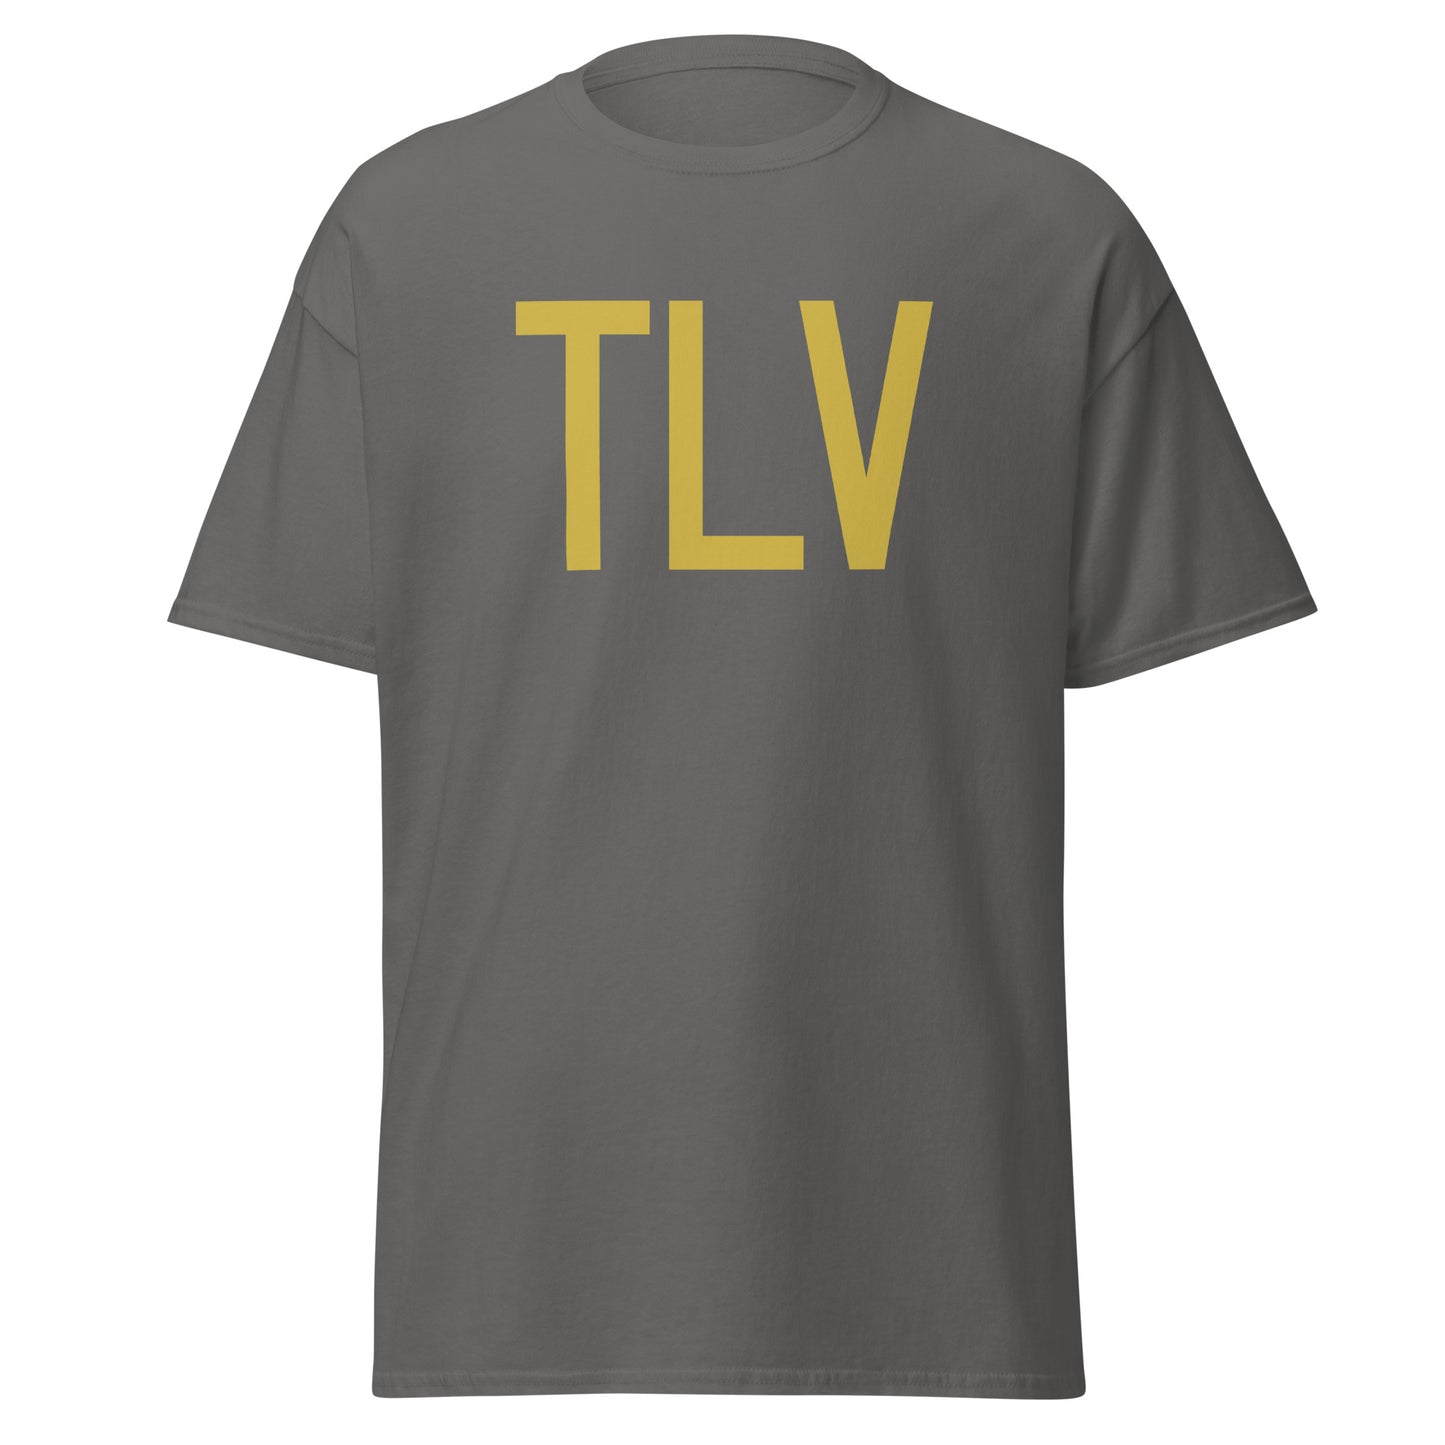 Aviation Enthusiast Men's Tee - Old Gold Graphic • TLV Tel Aviv • YHM Designs - Image 05